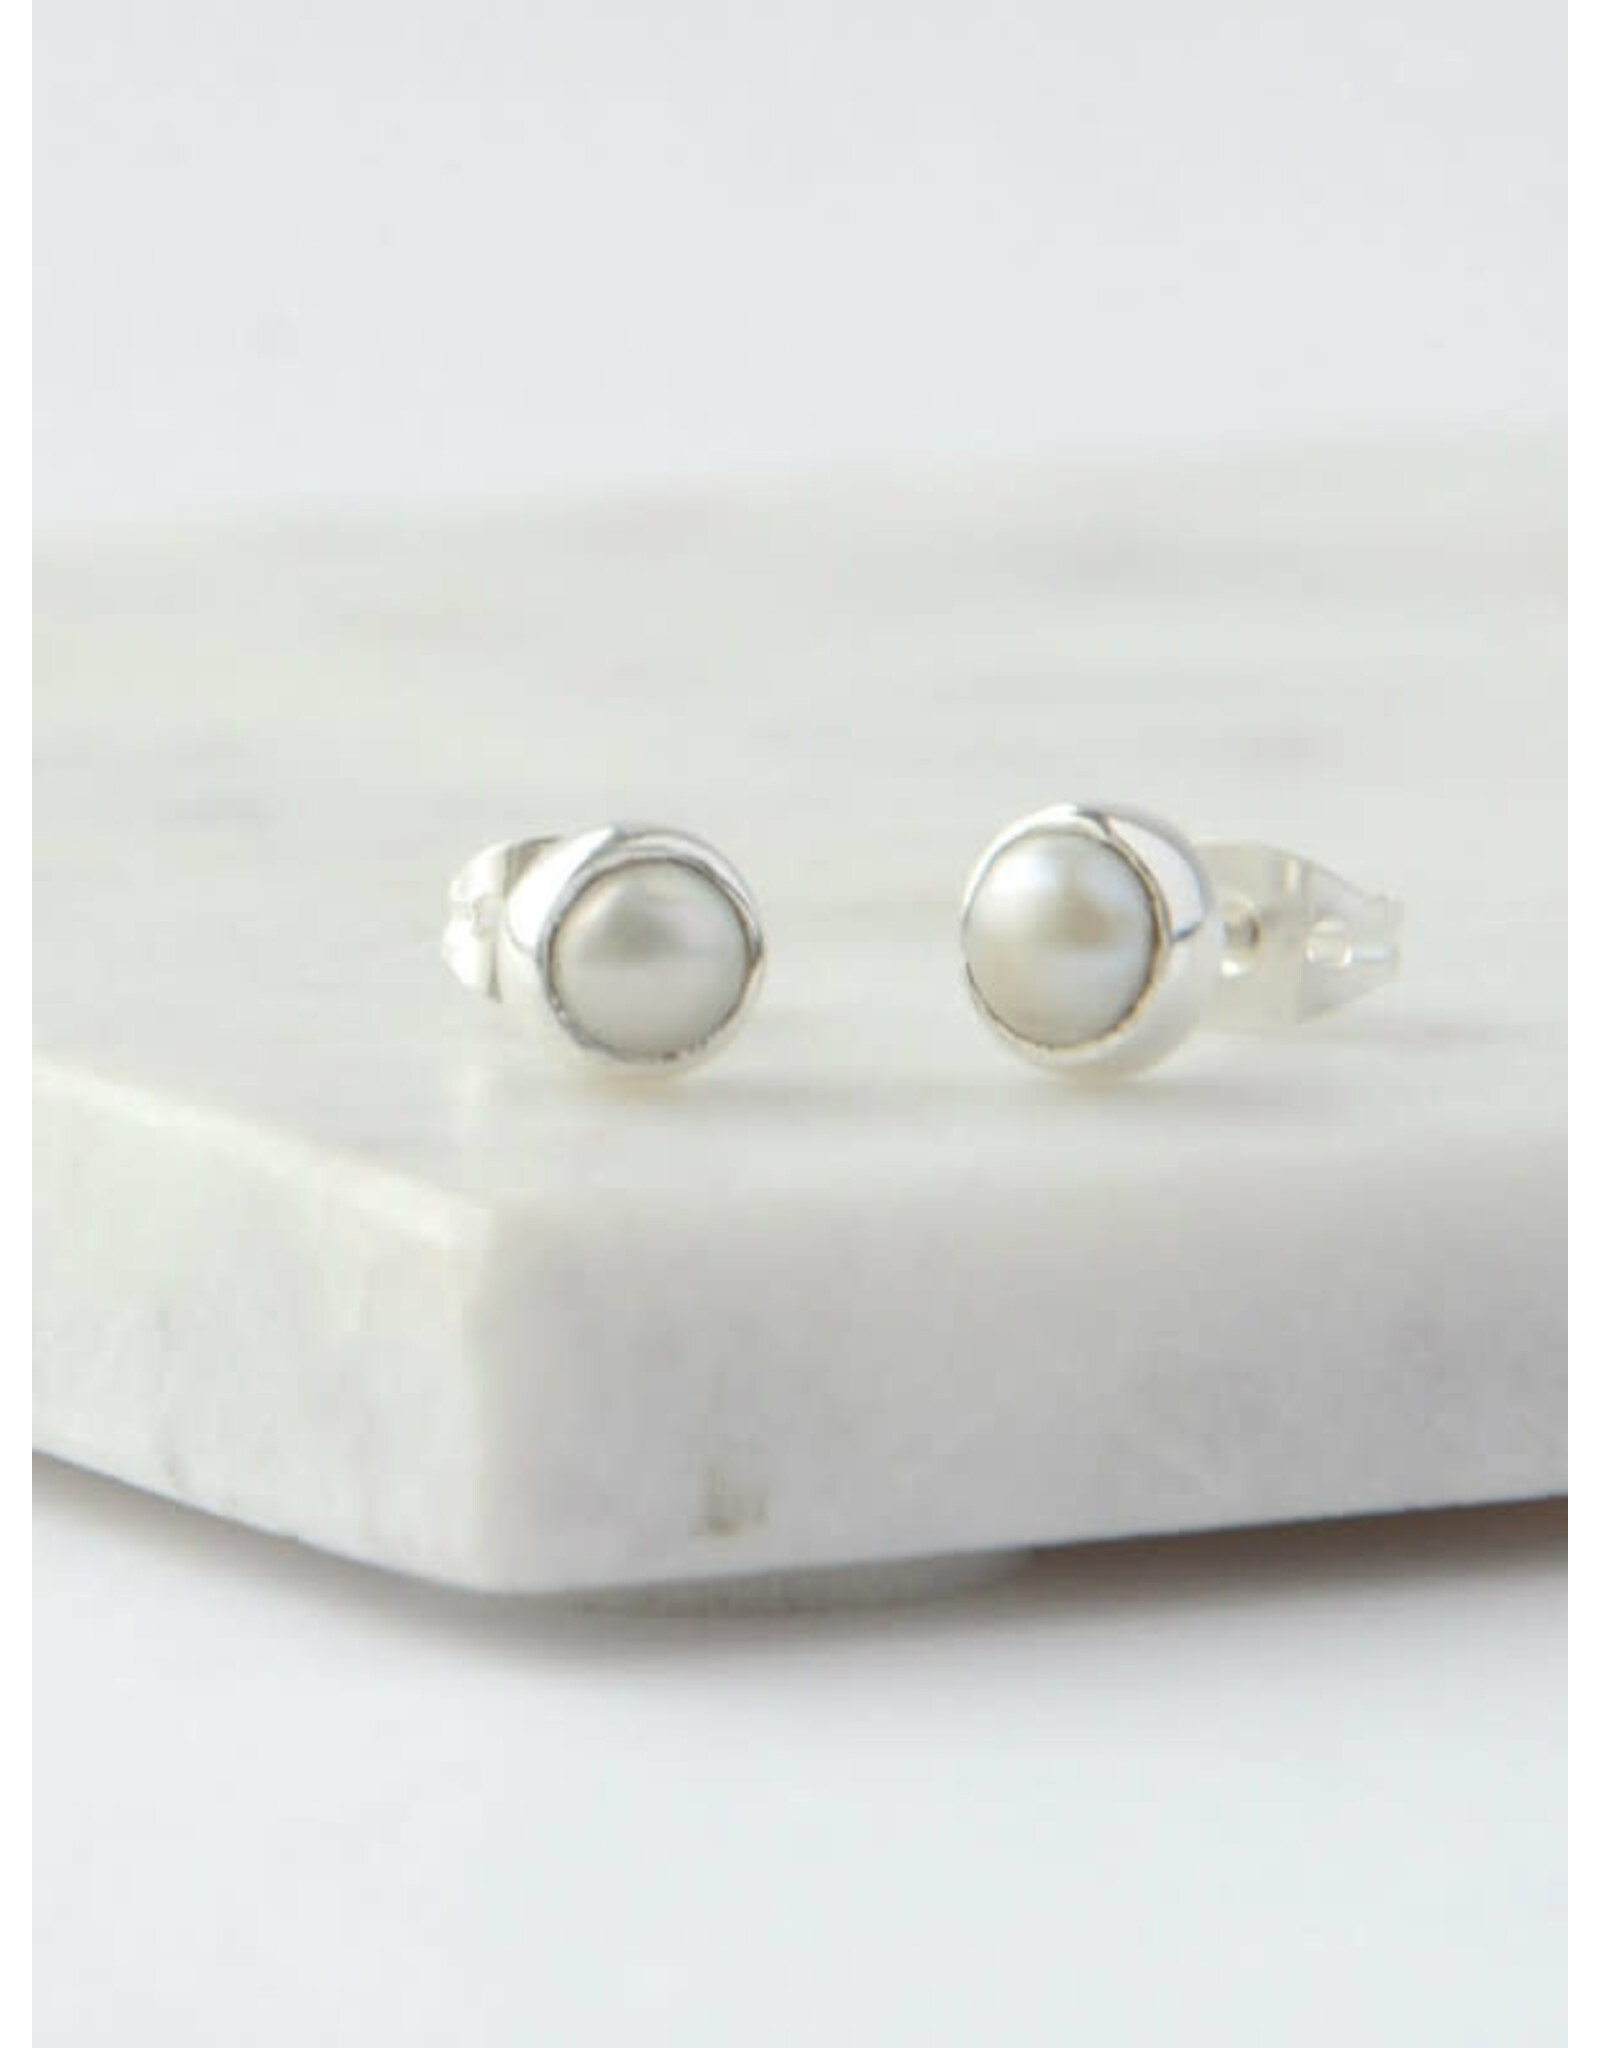 India Ethereal Pearl Studs, India